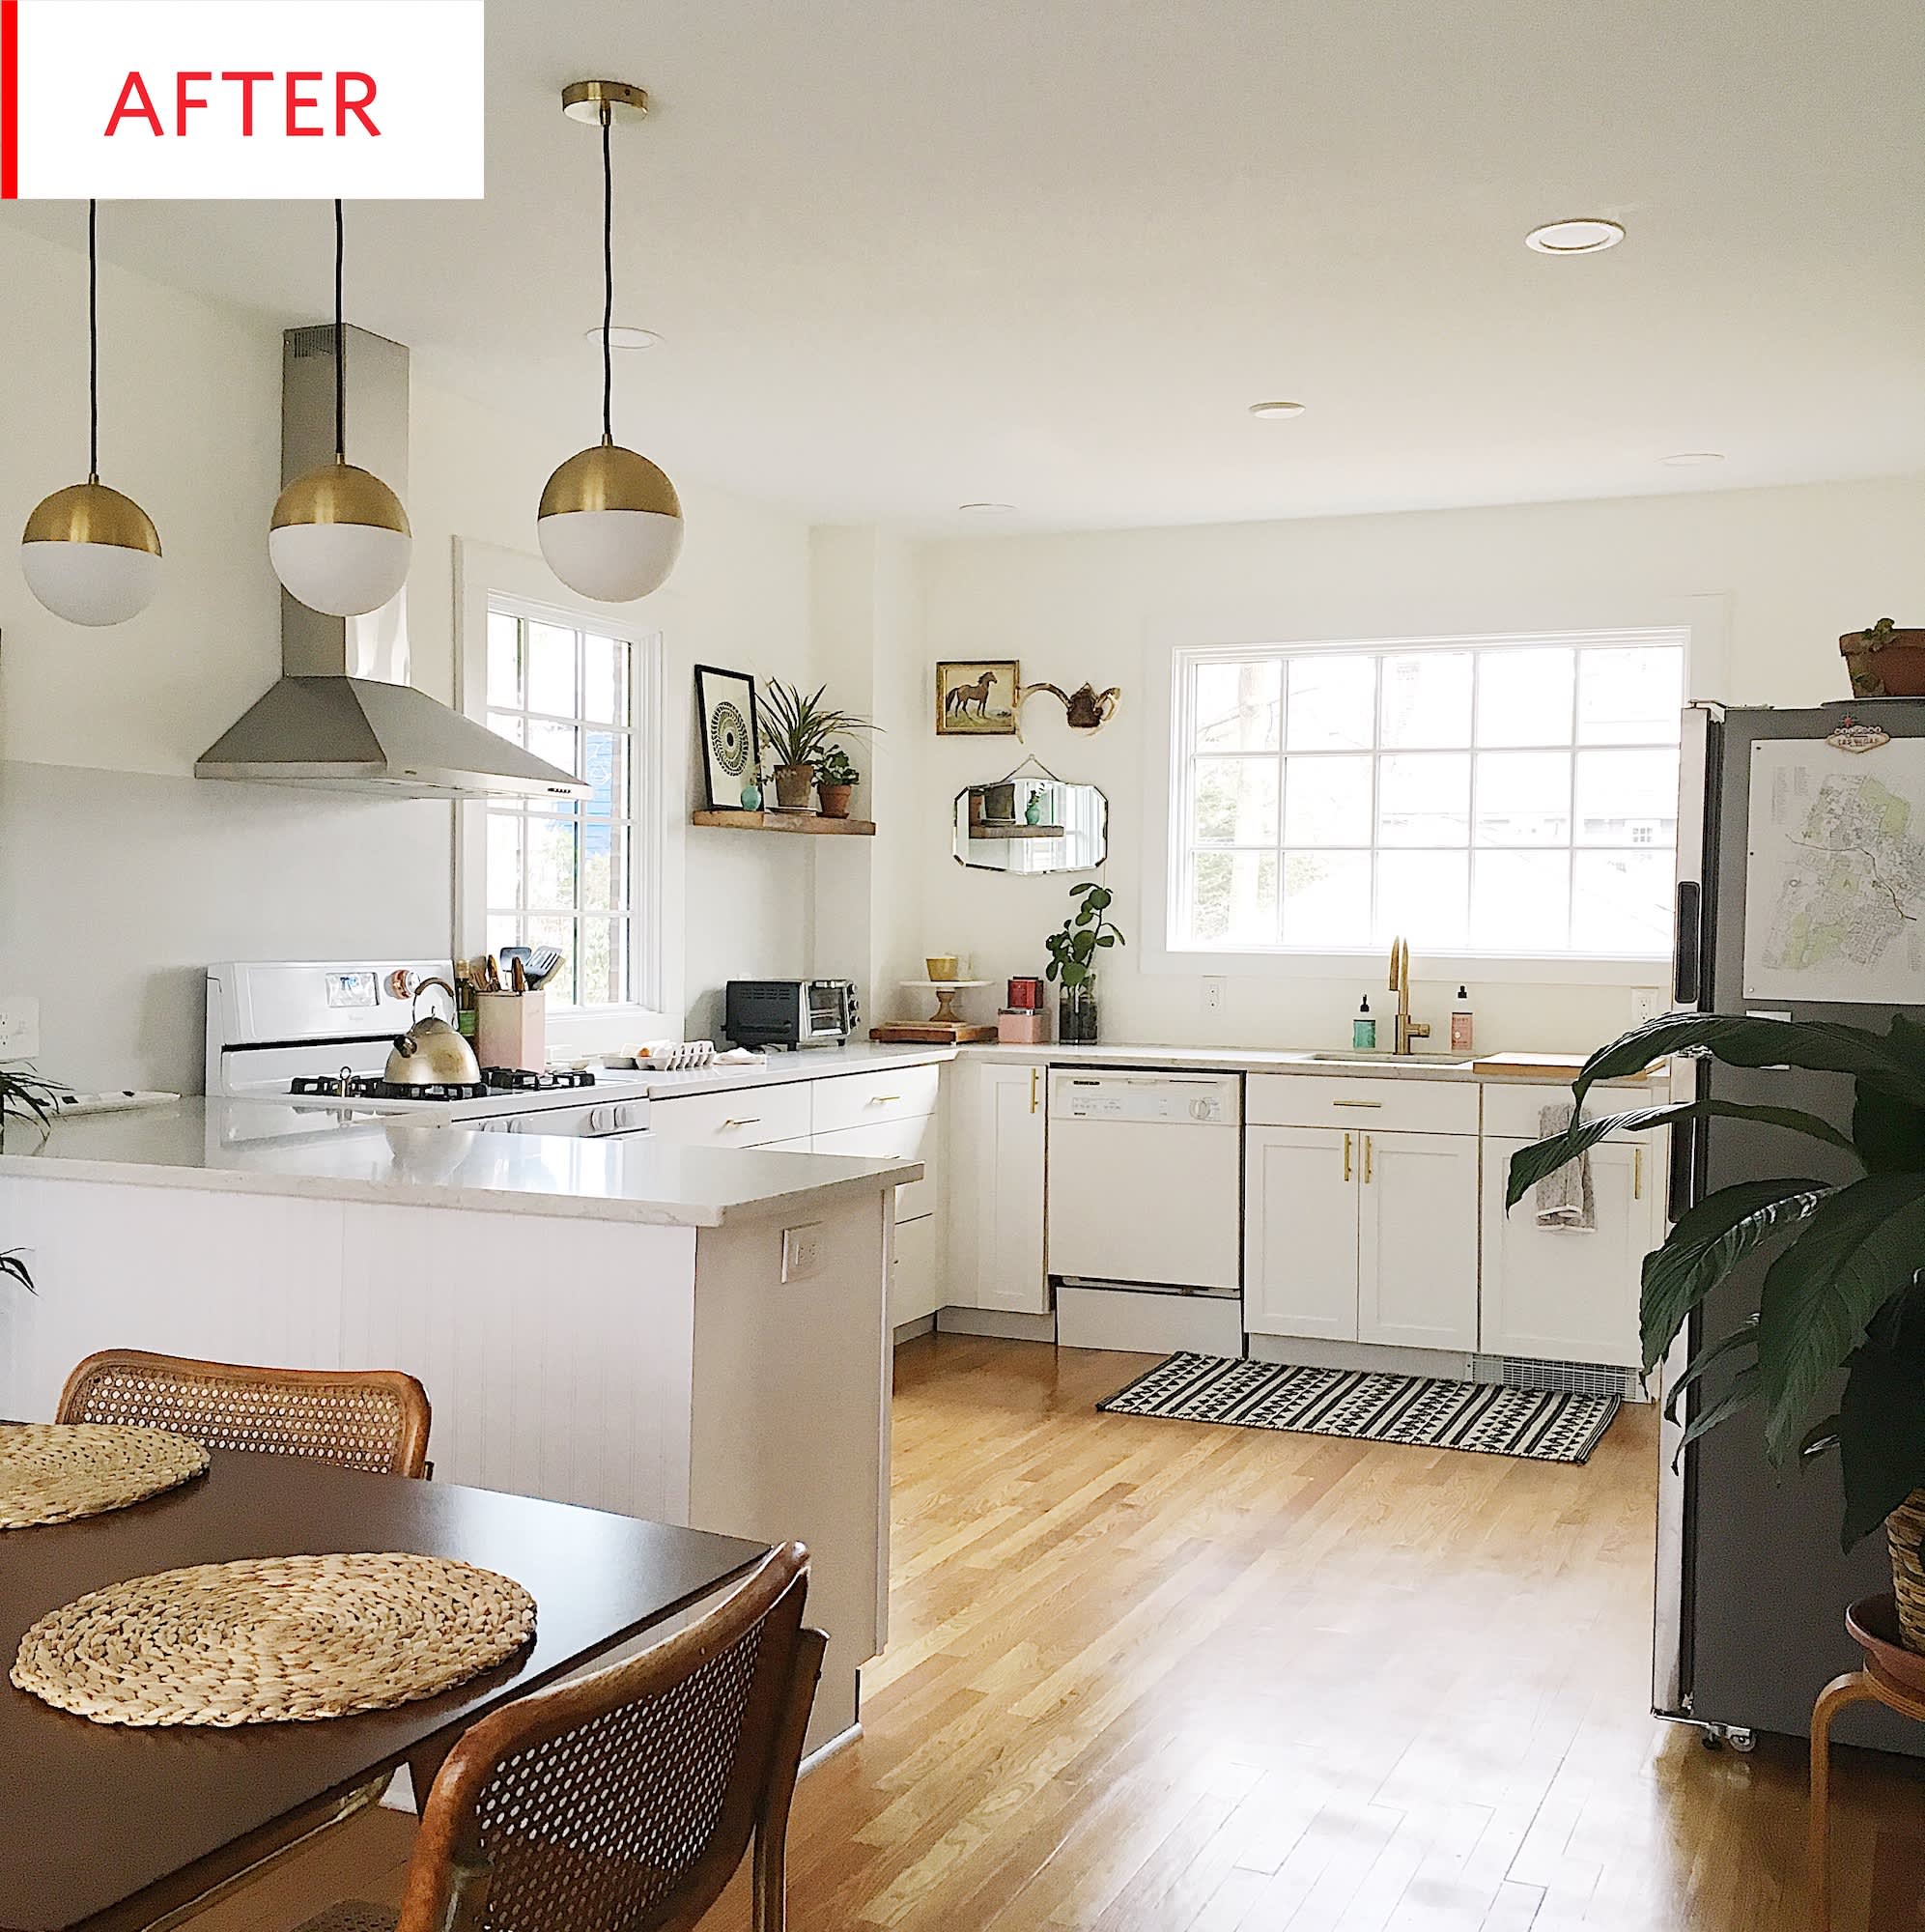 Before and After The 12 Best Kitchen Redos We Saw in 2019